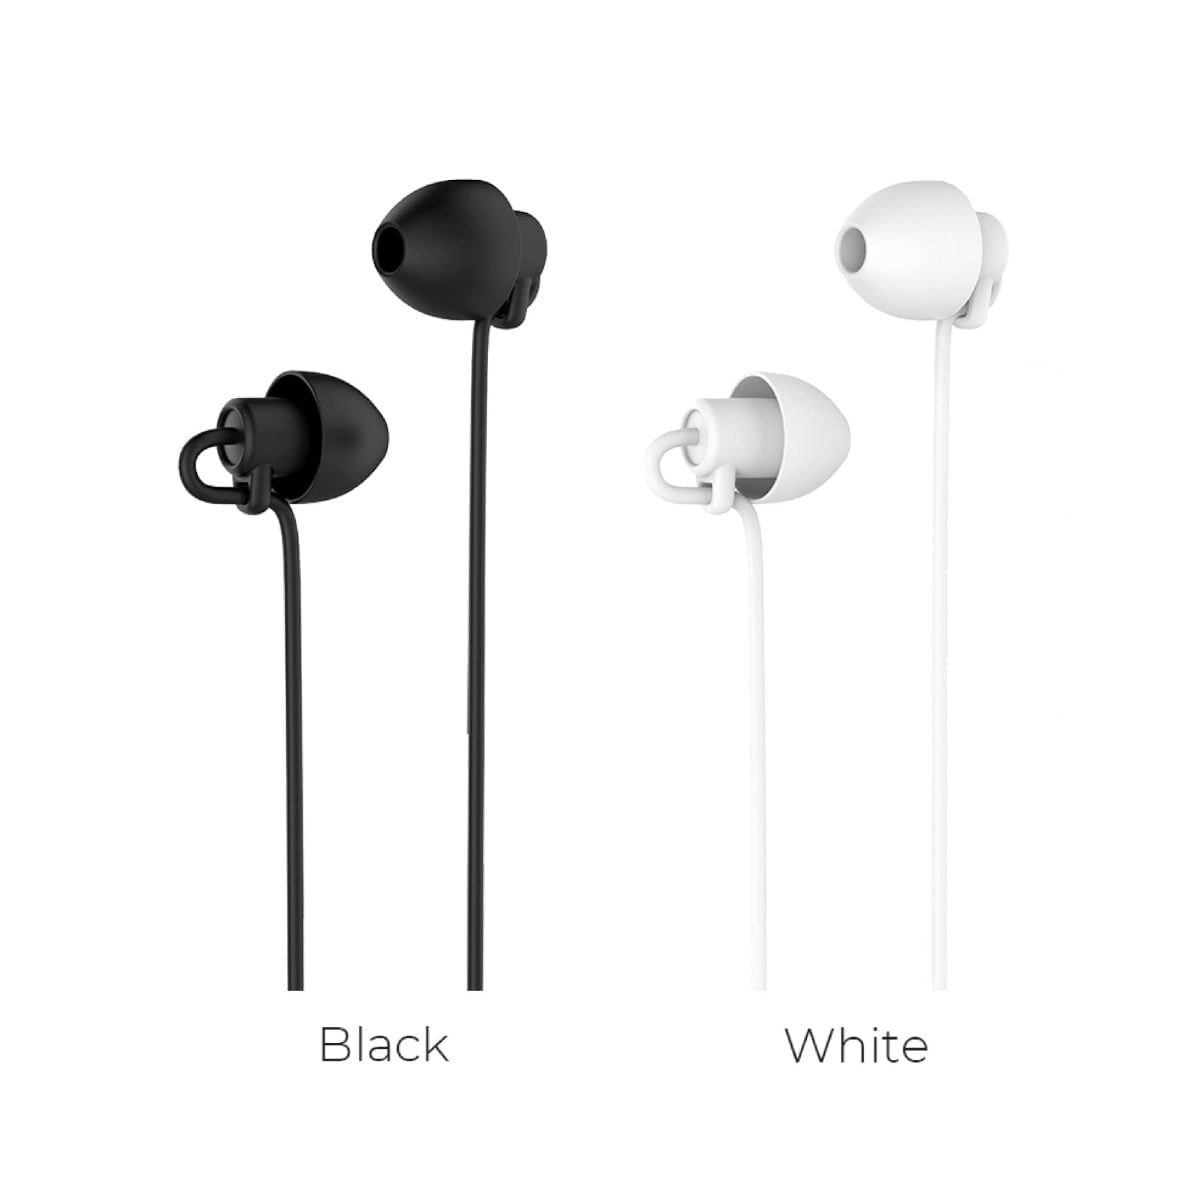 Earphone98 01 Scaled Hoco Material: Silica Gel, Tpe Enameled Wire Length: 1.2M, Weight: 10G Speaker: 6Mm Connector: 3.5Mm Microphone: With A Wheat Controller Wire Control: Single Button Control Silicone Material, Soft And Does Not Oppress The Ear, Suitable For Sleeping Silicon Sleep Earphones M56 Earphone Wired Headphones With Mic – White